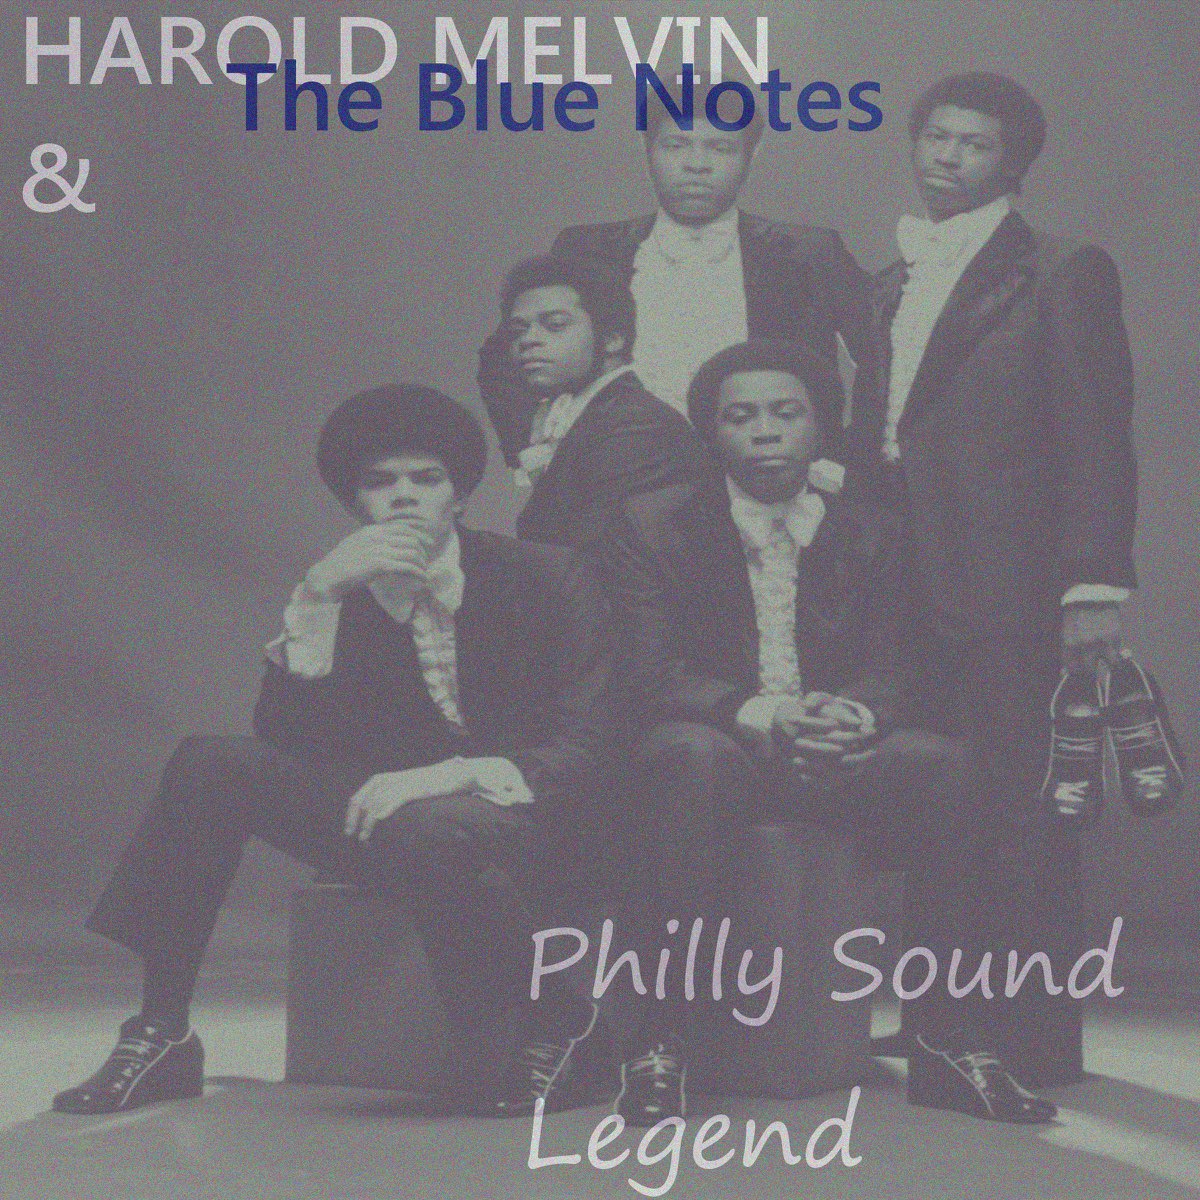 Sound legend some kind of kiss. Harold Melvin & the Blue Notes - Bad luck. Harold Melvin - Wake up Everybody. Harold Melvin & the Bluenotes - if you don't know me by Now. Harold Melvin & the Blue Notes reaching for the World.